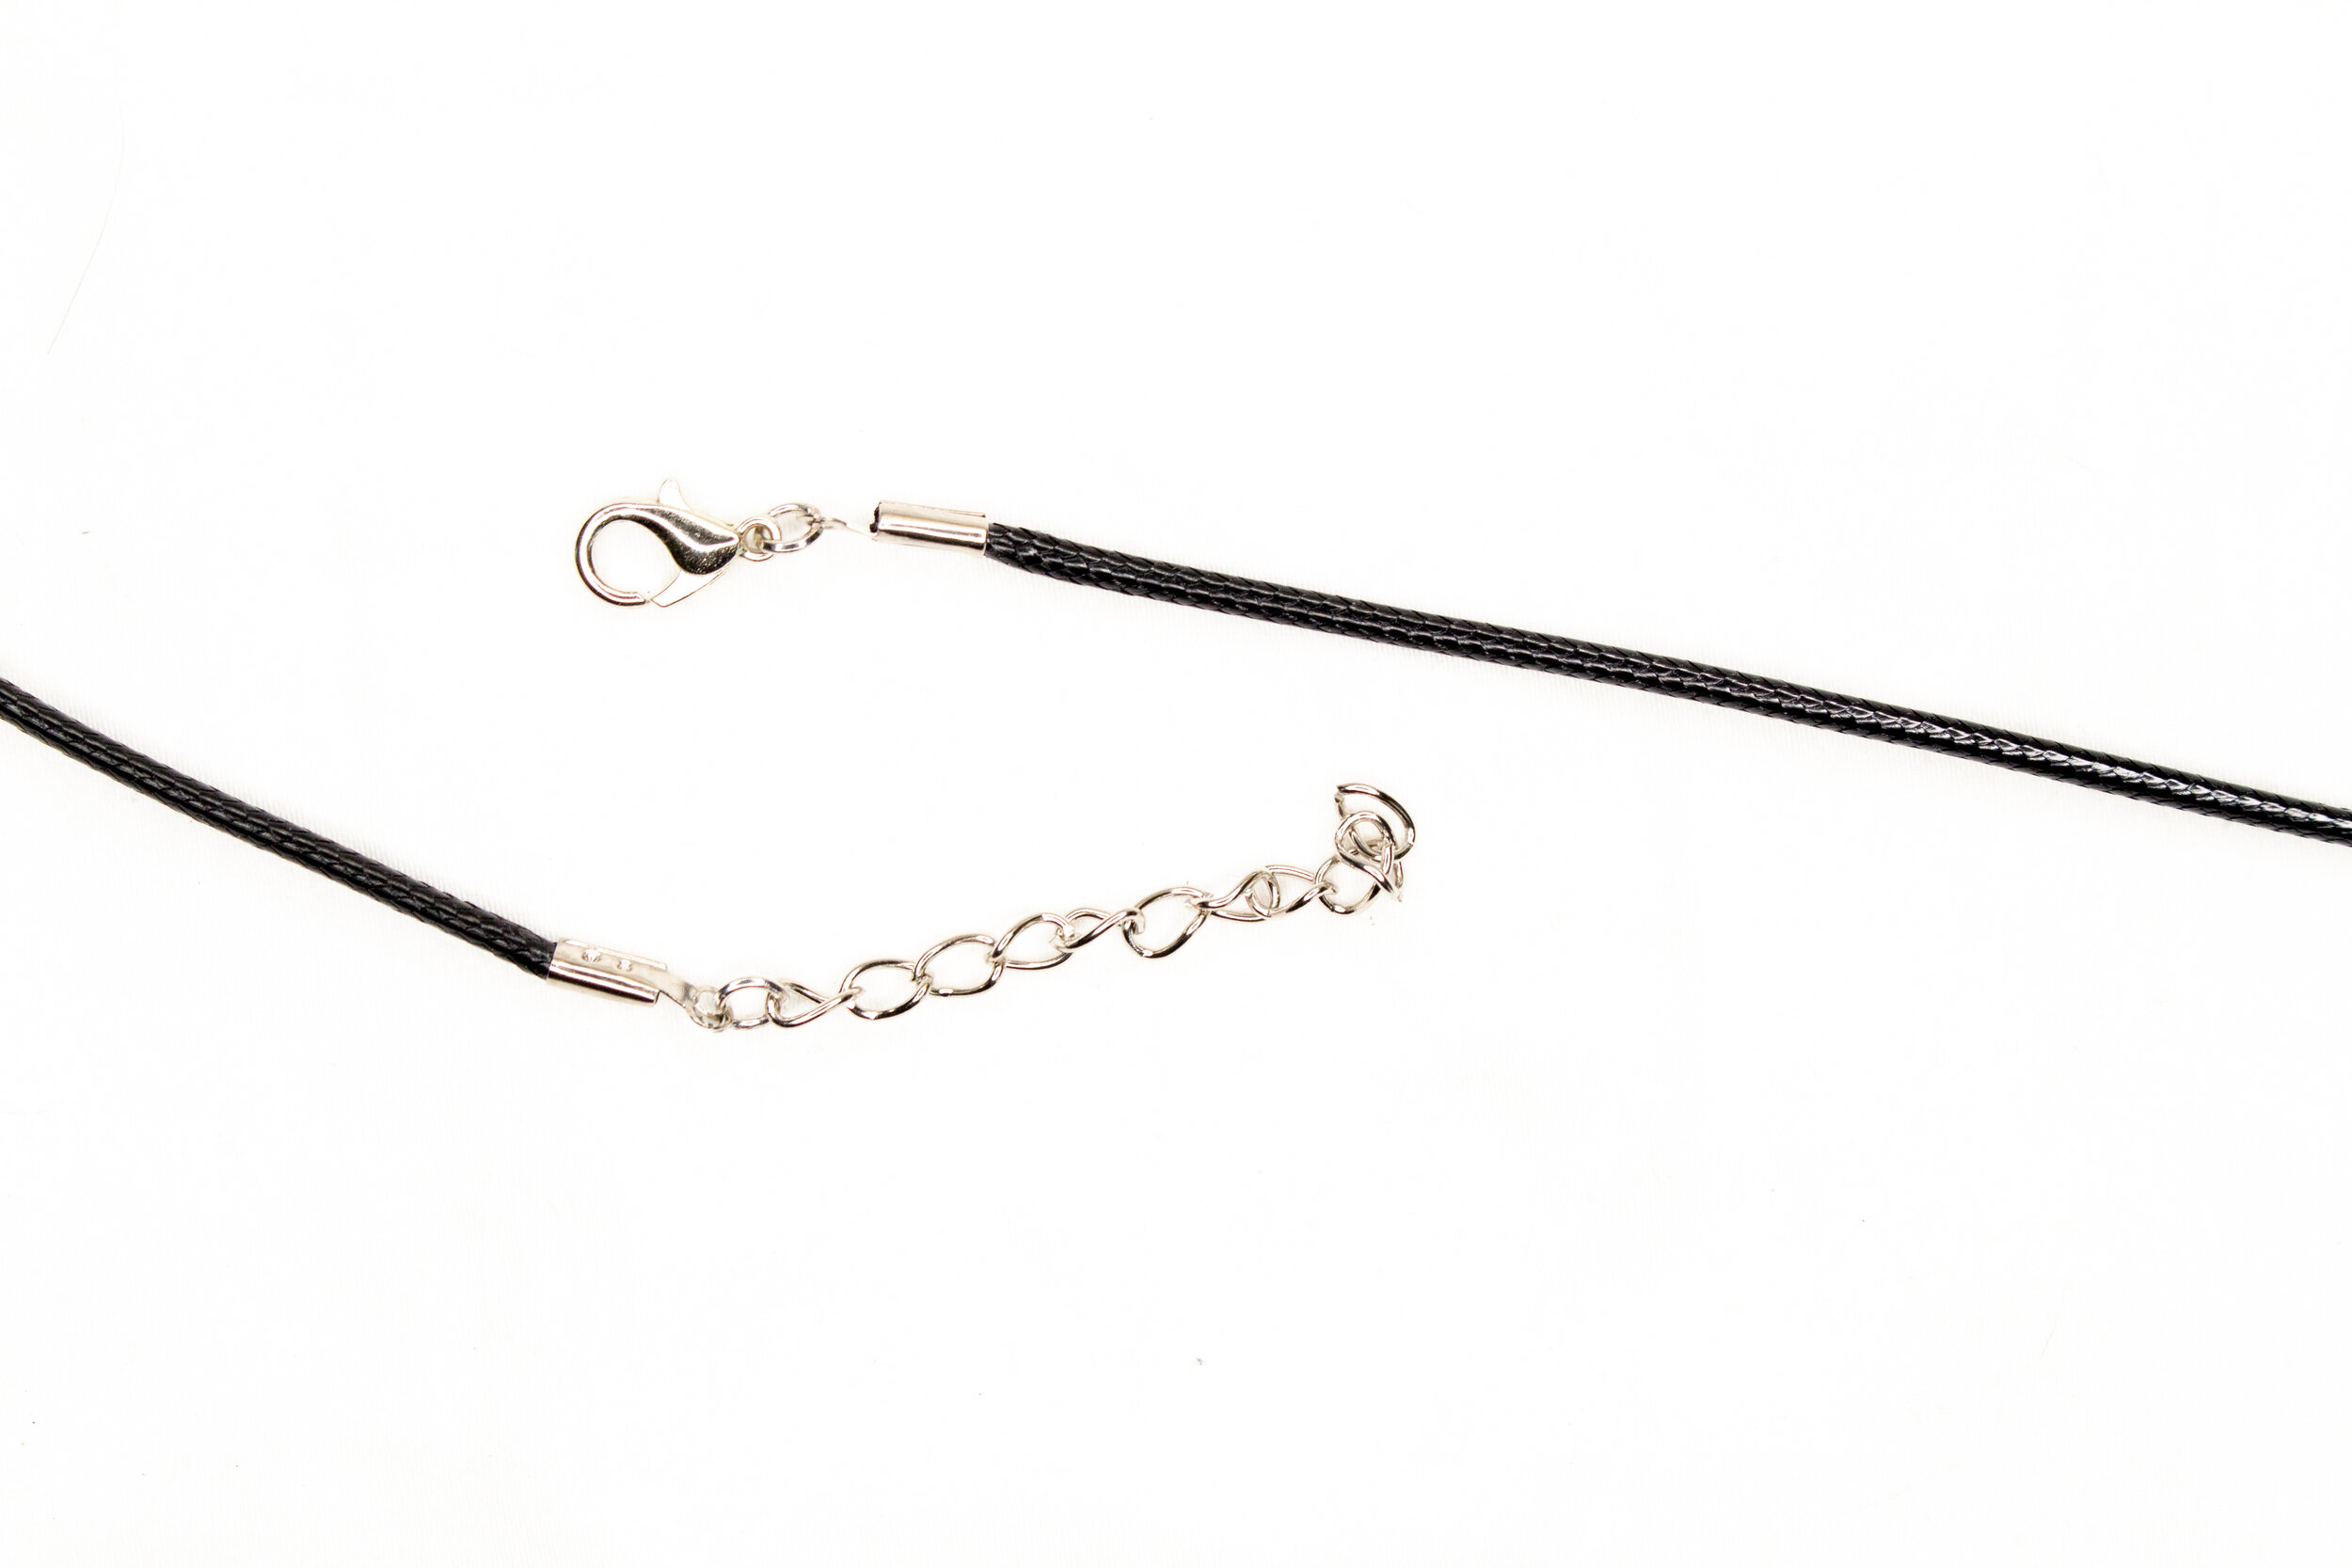 Add a Chain, 24” Black Leather Braided Cord Rope, Silver Clasp — Mae  Marvelle